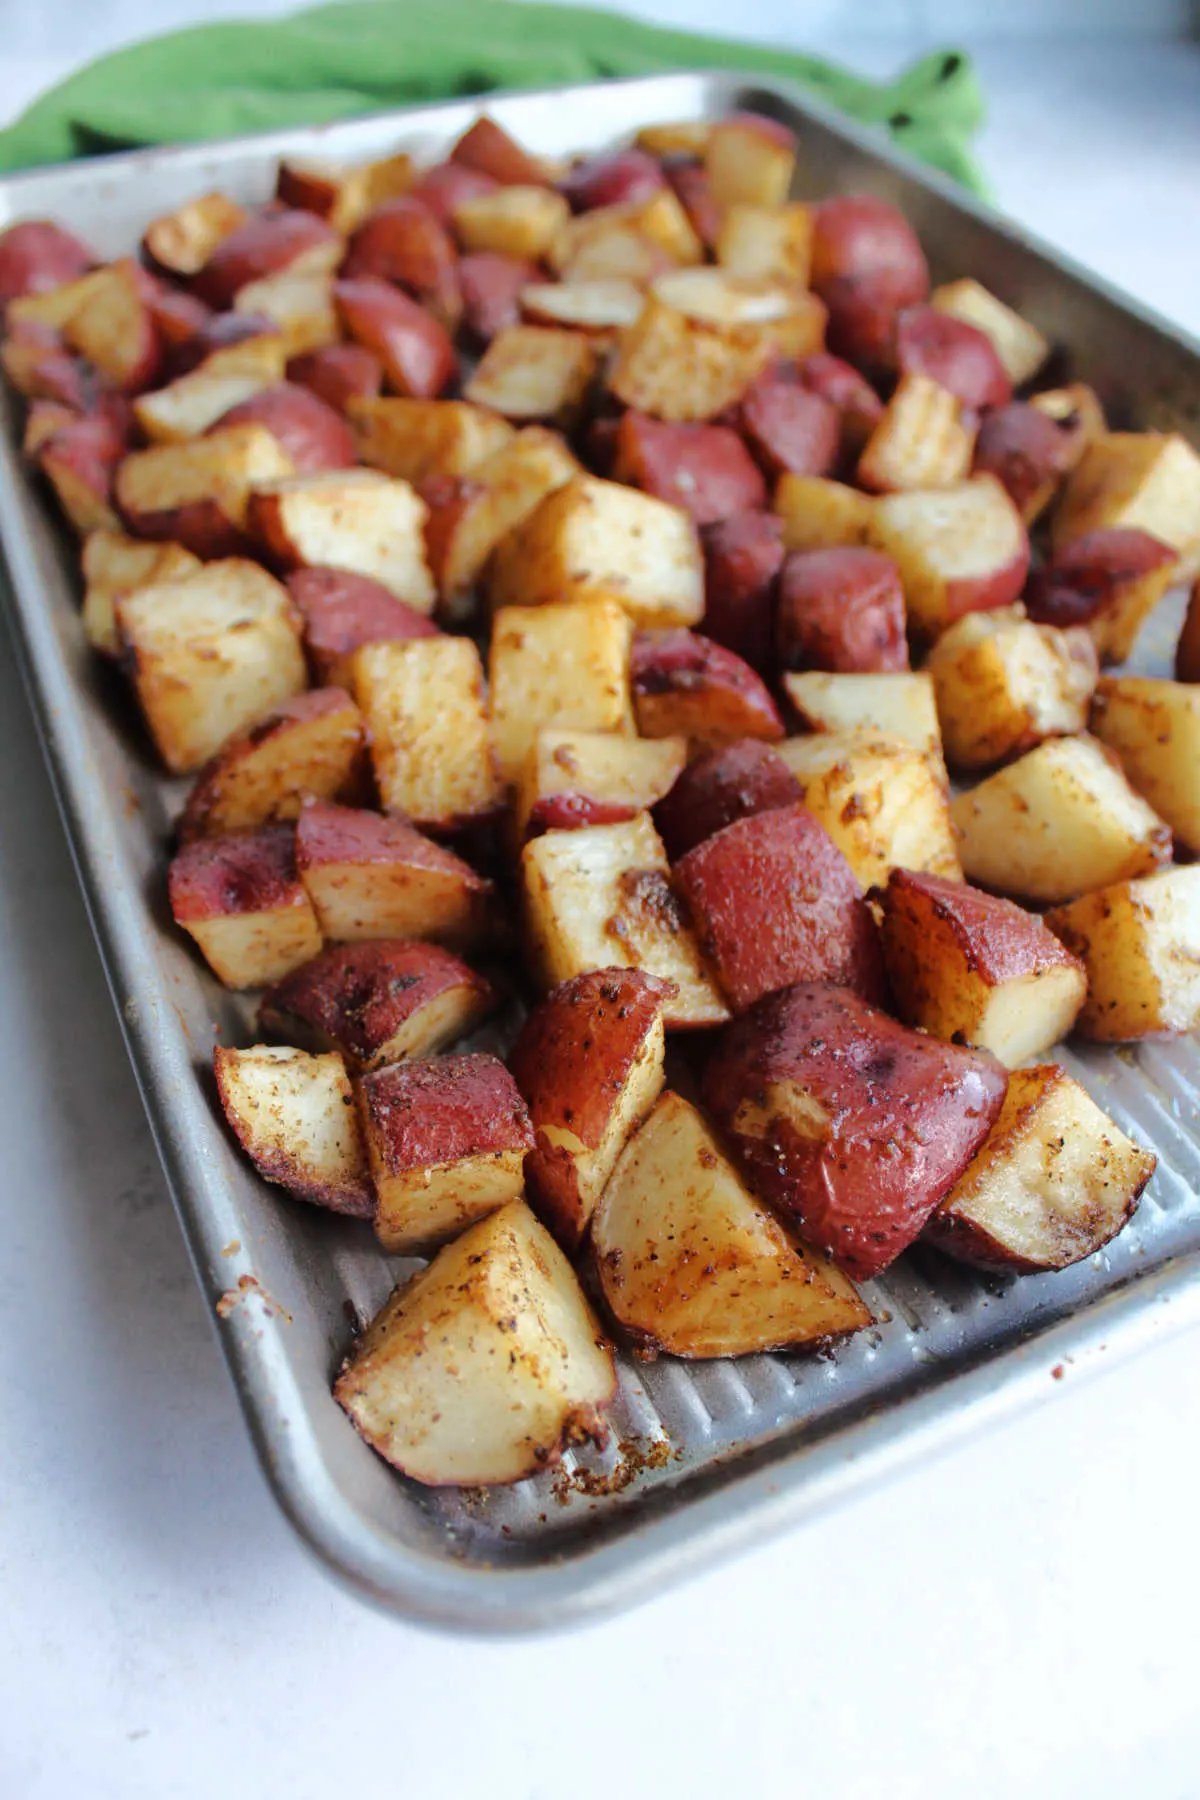 Tray of roasted potatoes fresh from the oven.